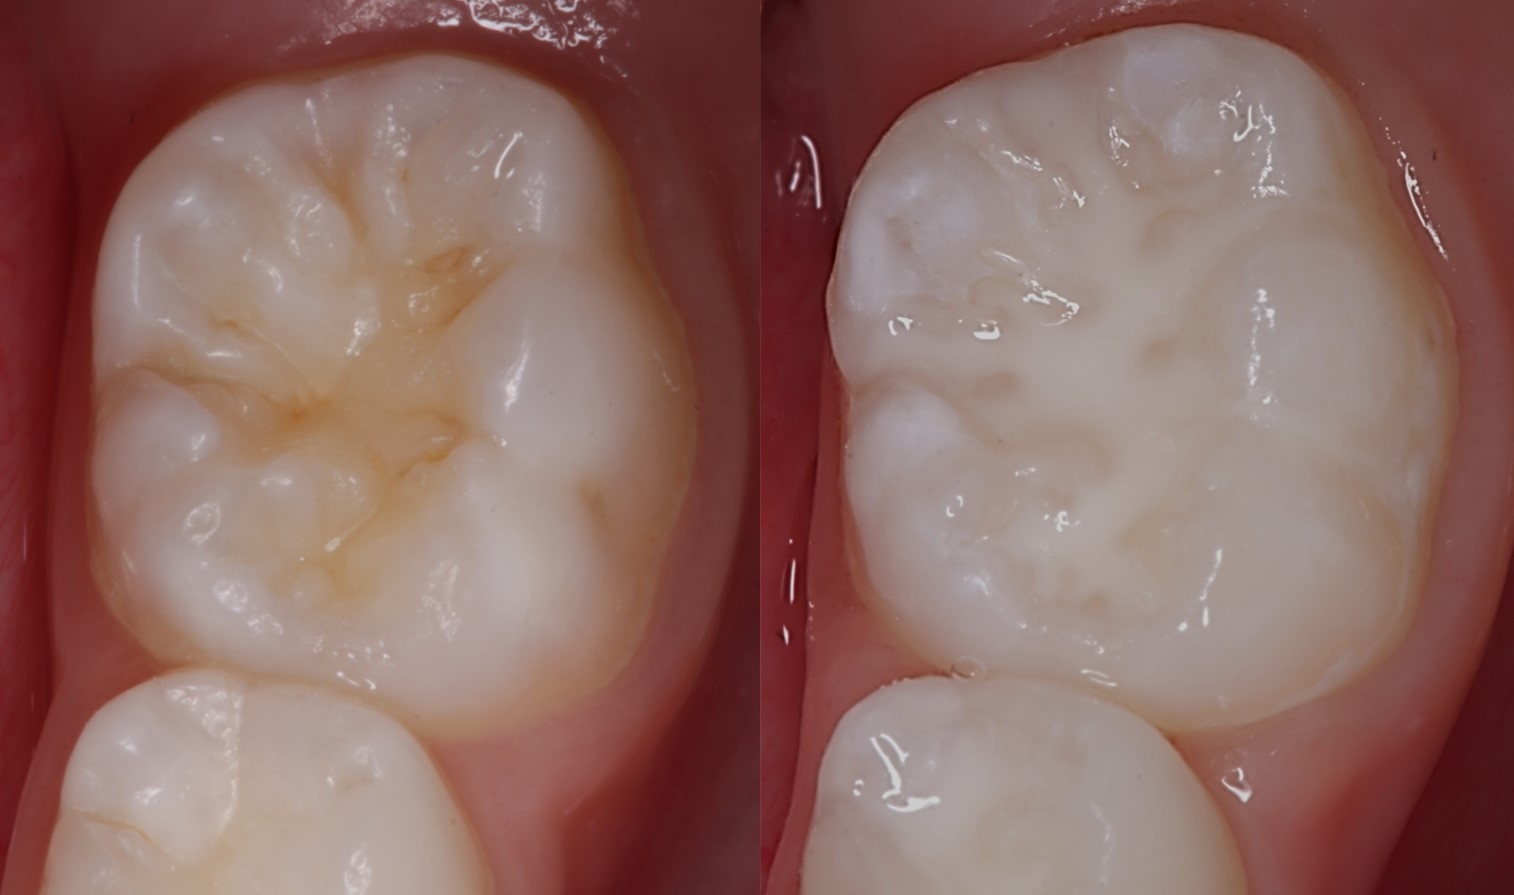 Pit and fissure sealants